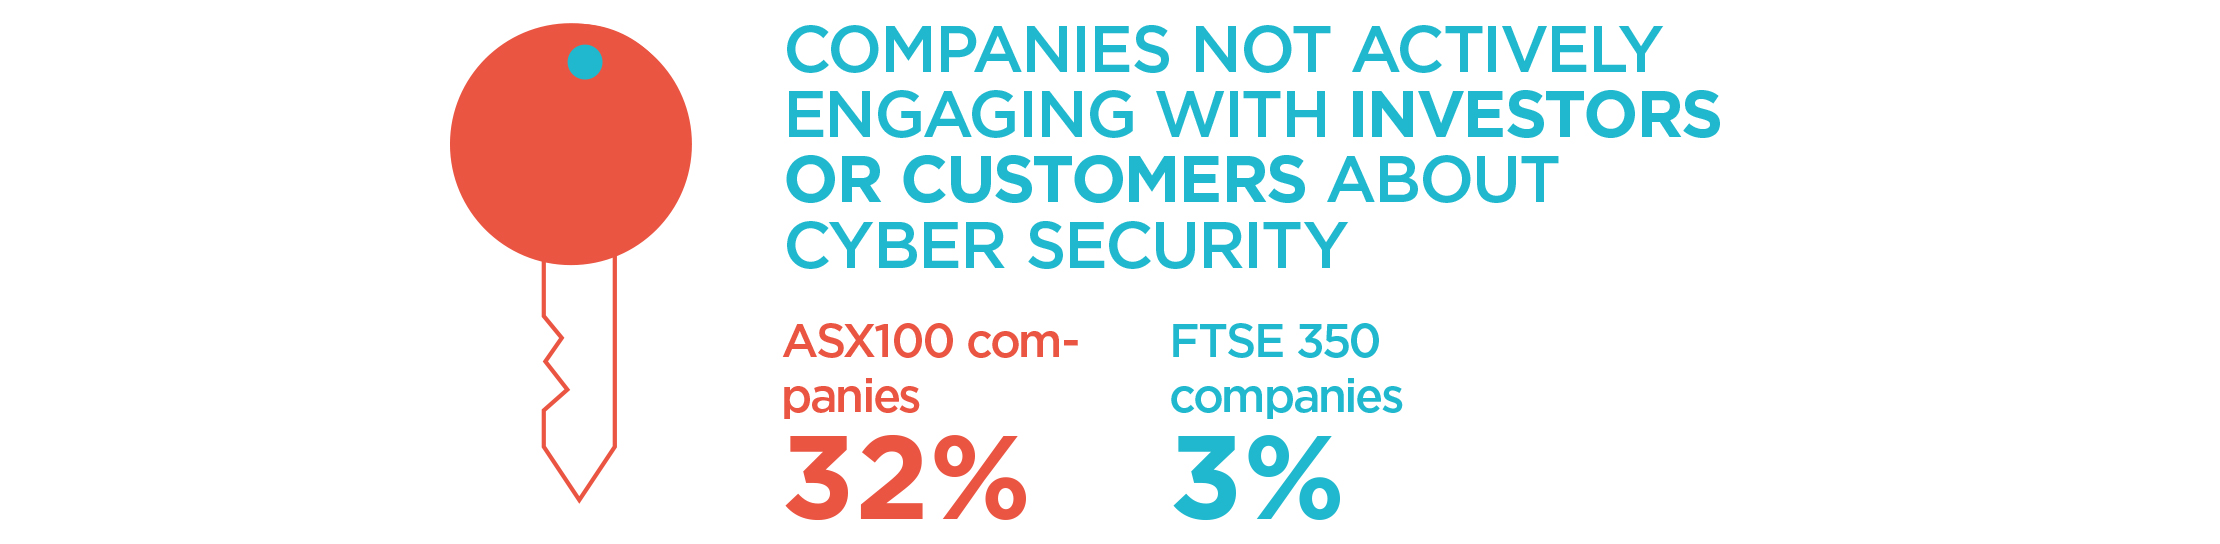 Companies not actively engaging with Investors or customers about Cyber Security